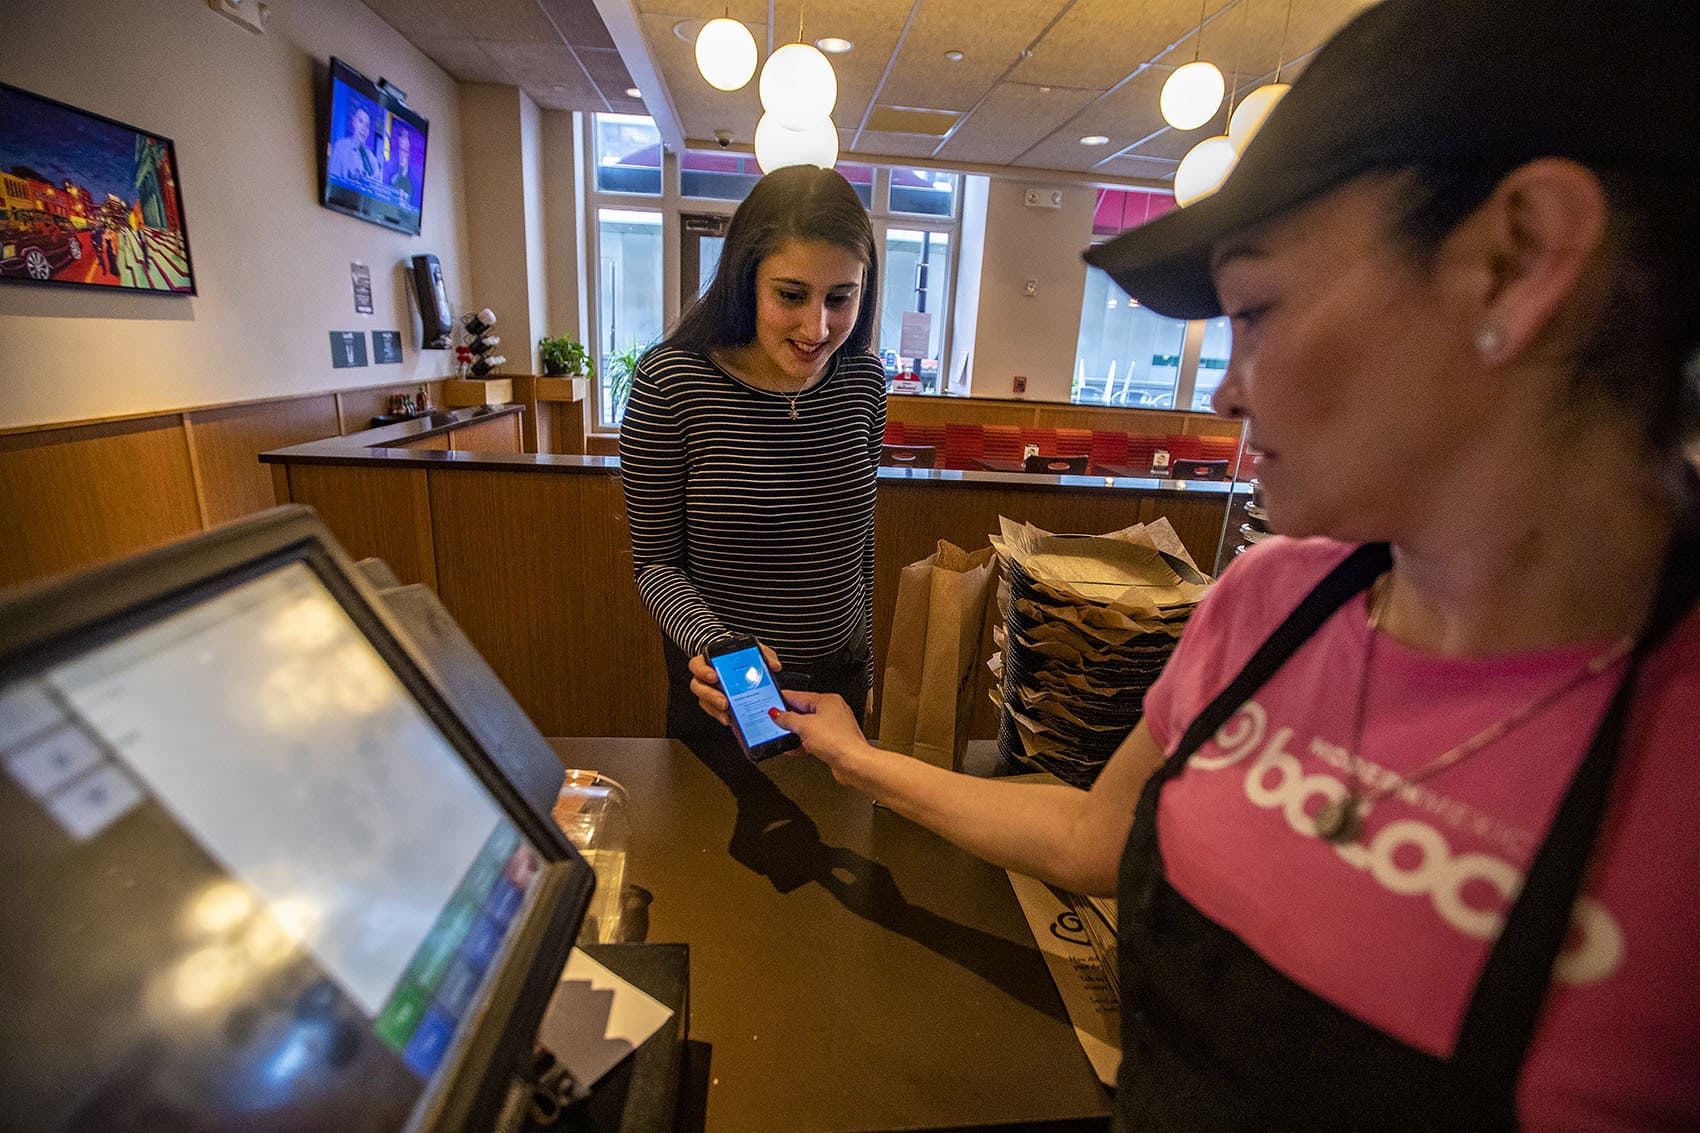 Swathi Joshi purchases a breakfast burrito with the “Food For All” app at Boloco at Atlantic Wharf. (Jesse Costa/WBUR)